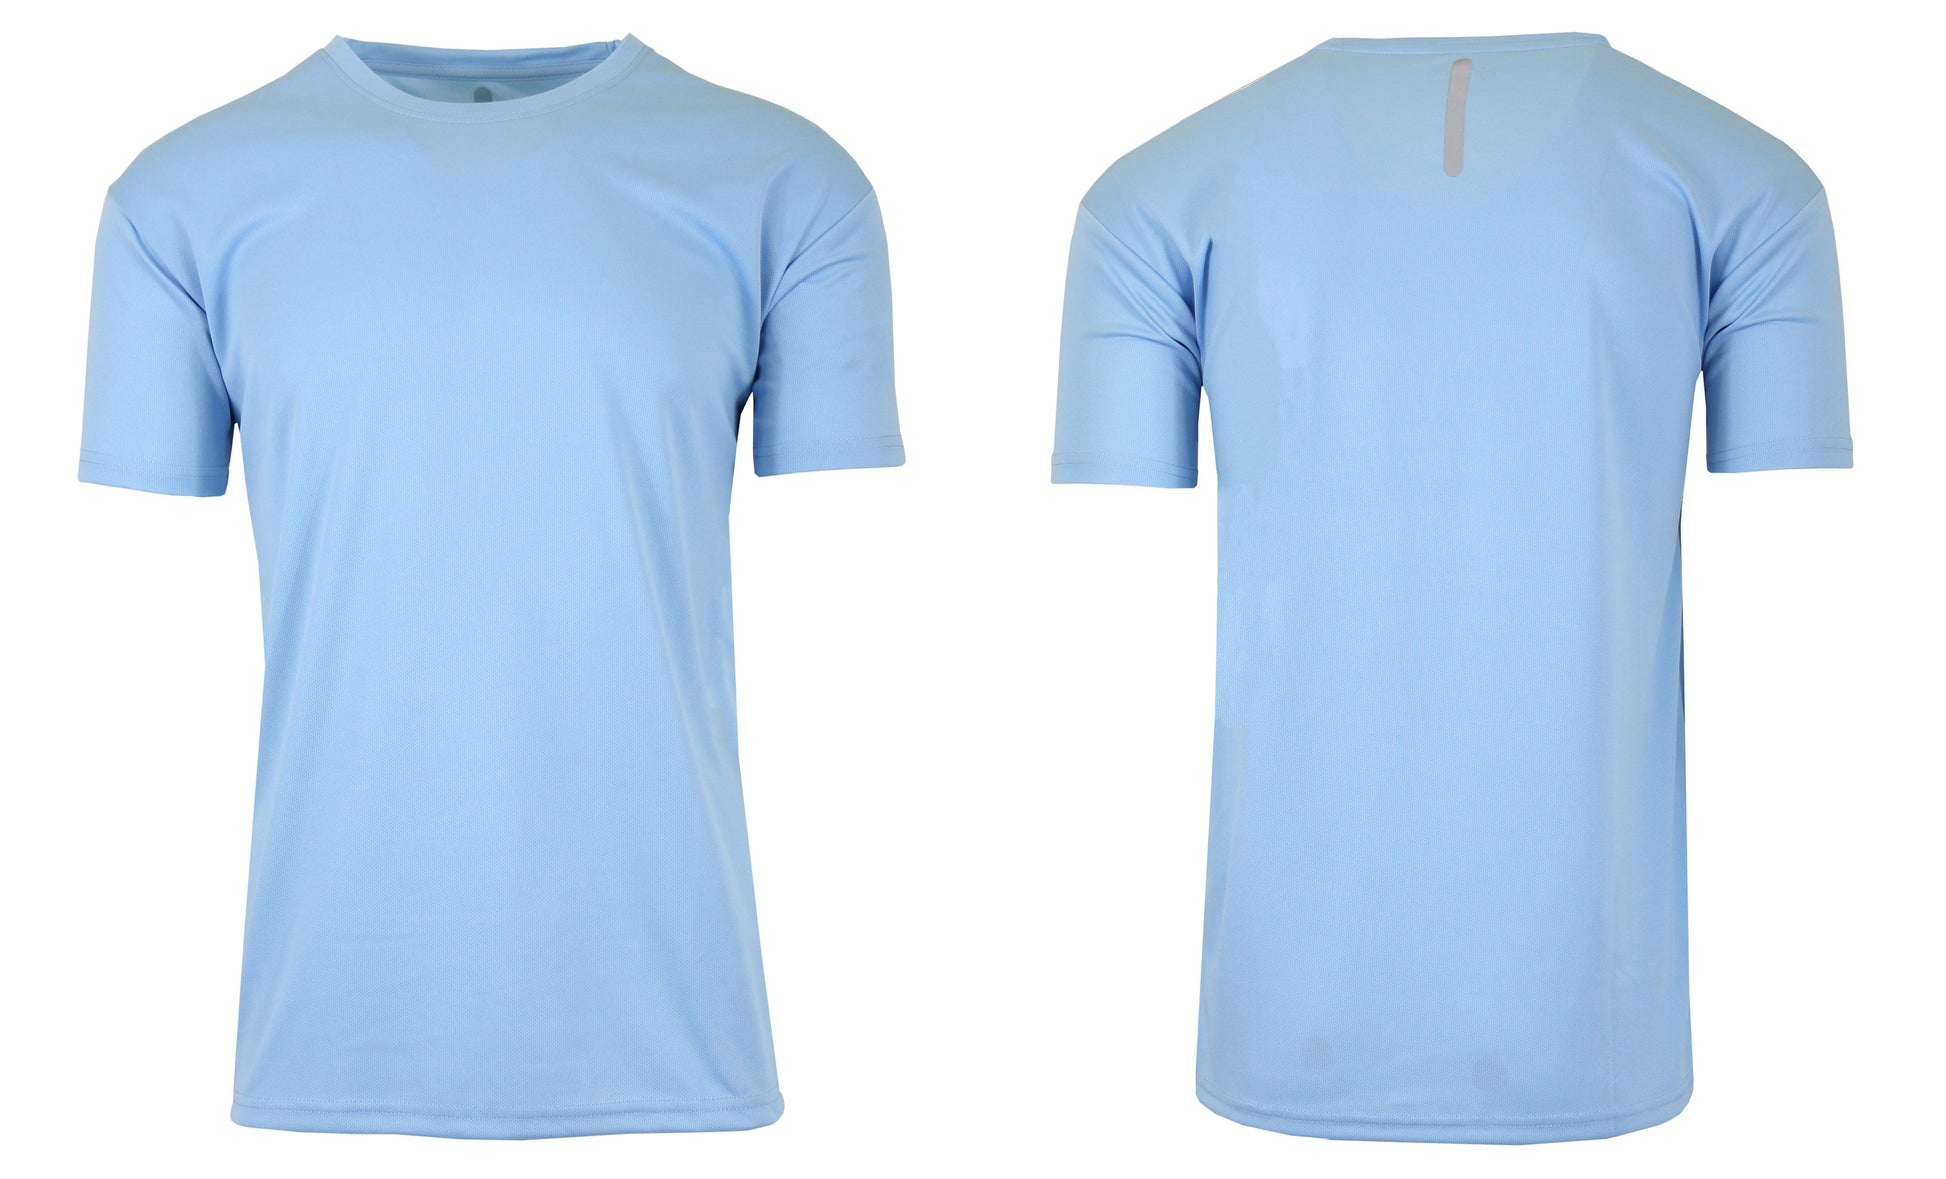 Men's Moisture-Wicking Wrinkle Free Performance Tee (S-2XL) - GalaxybyHarvic